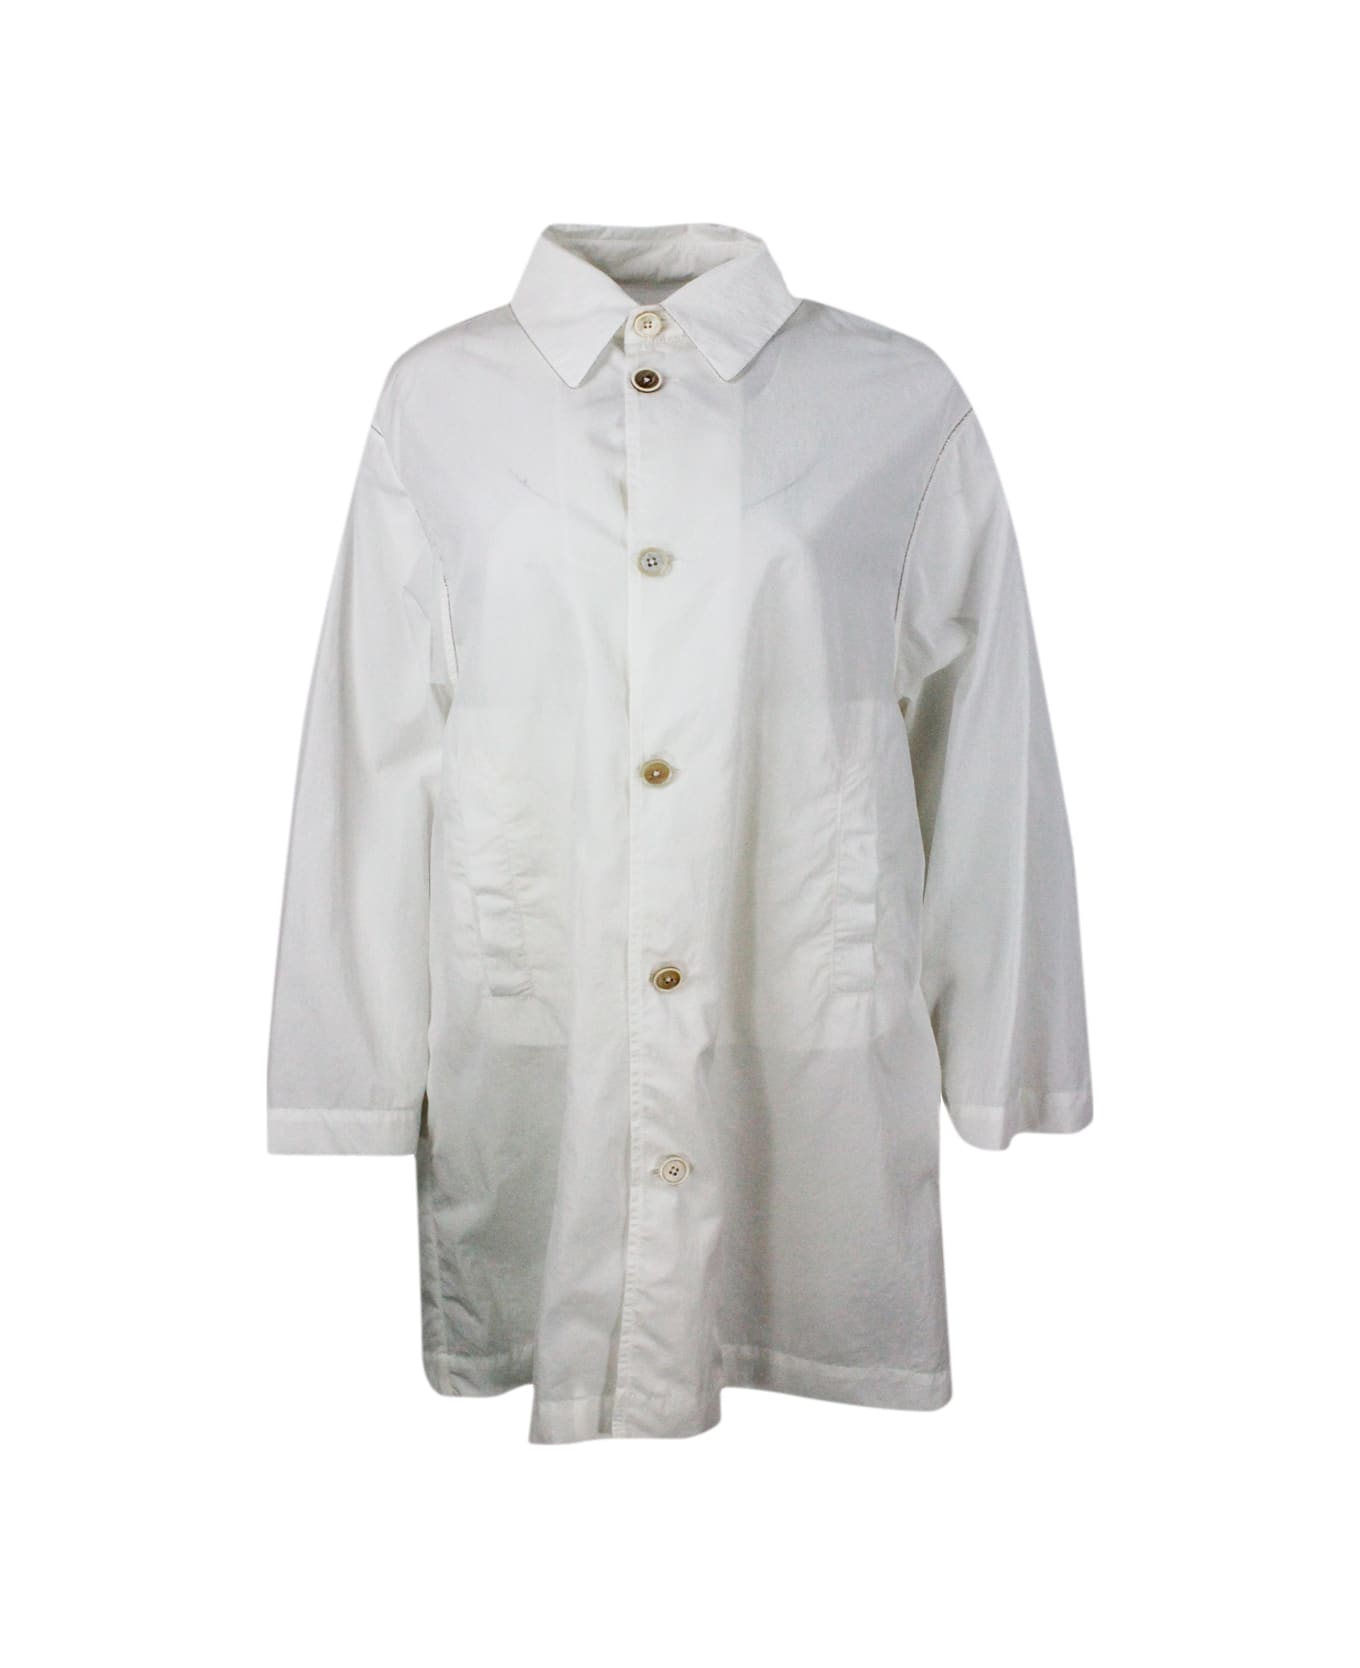 Fabiana Filippi Lightweight Nylon Windproof Outerware With Collar And Button Closure Embellished With Rows Of Brilliant Monili - White